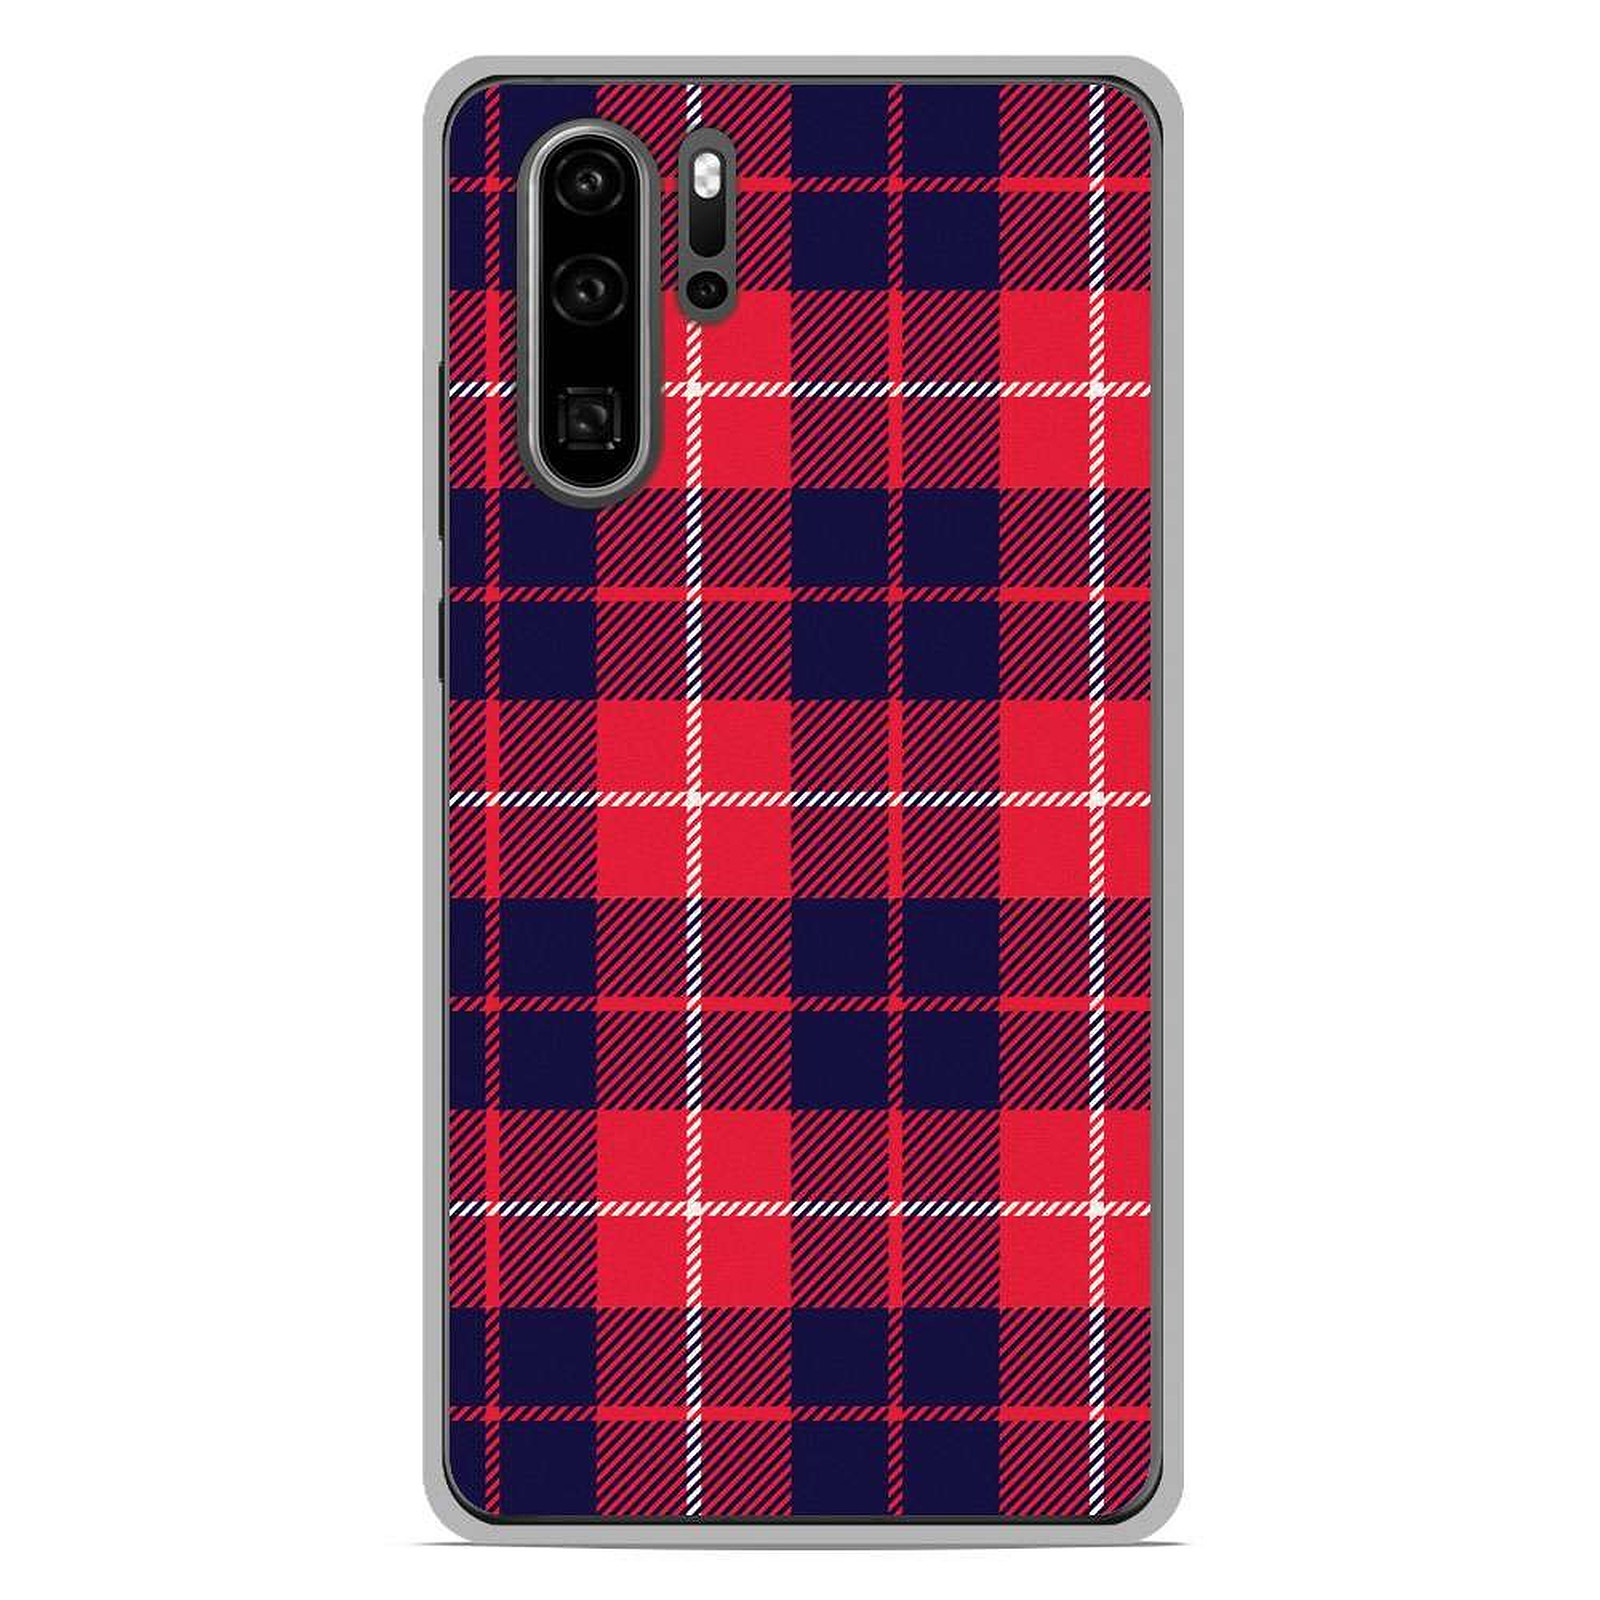 1001 Coques Coque silicone gel Huawei P30 Pro motif Tartan Rouge 2 - Coque telephone 1001Coques